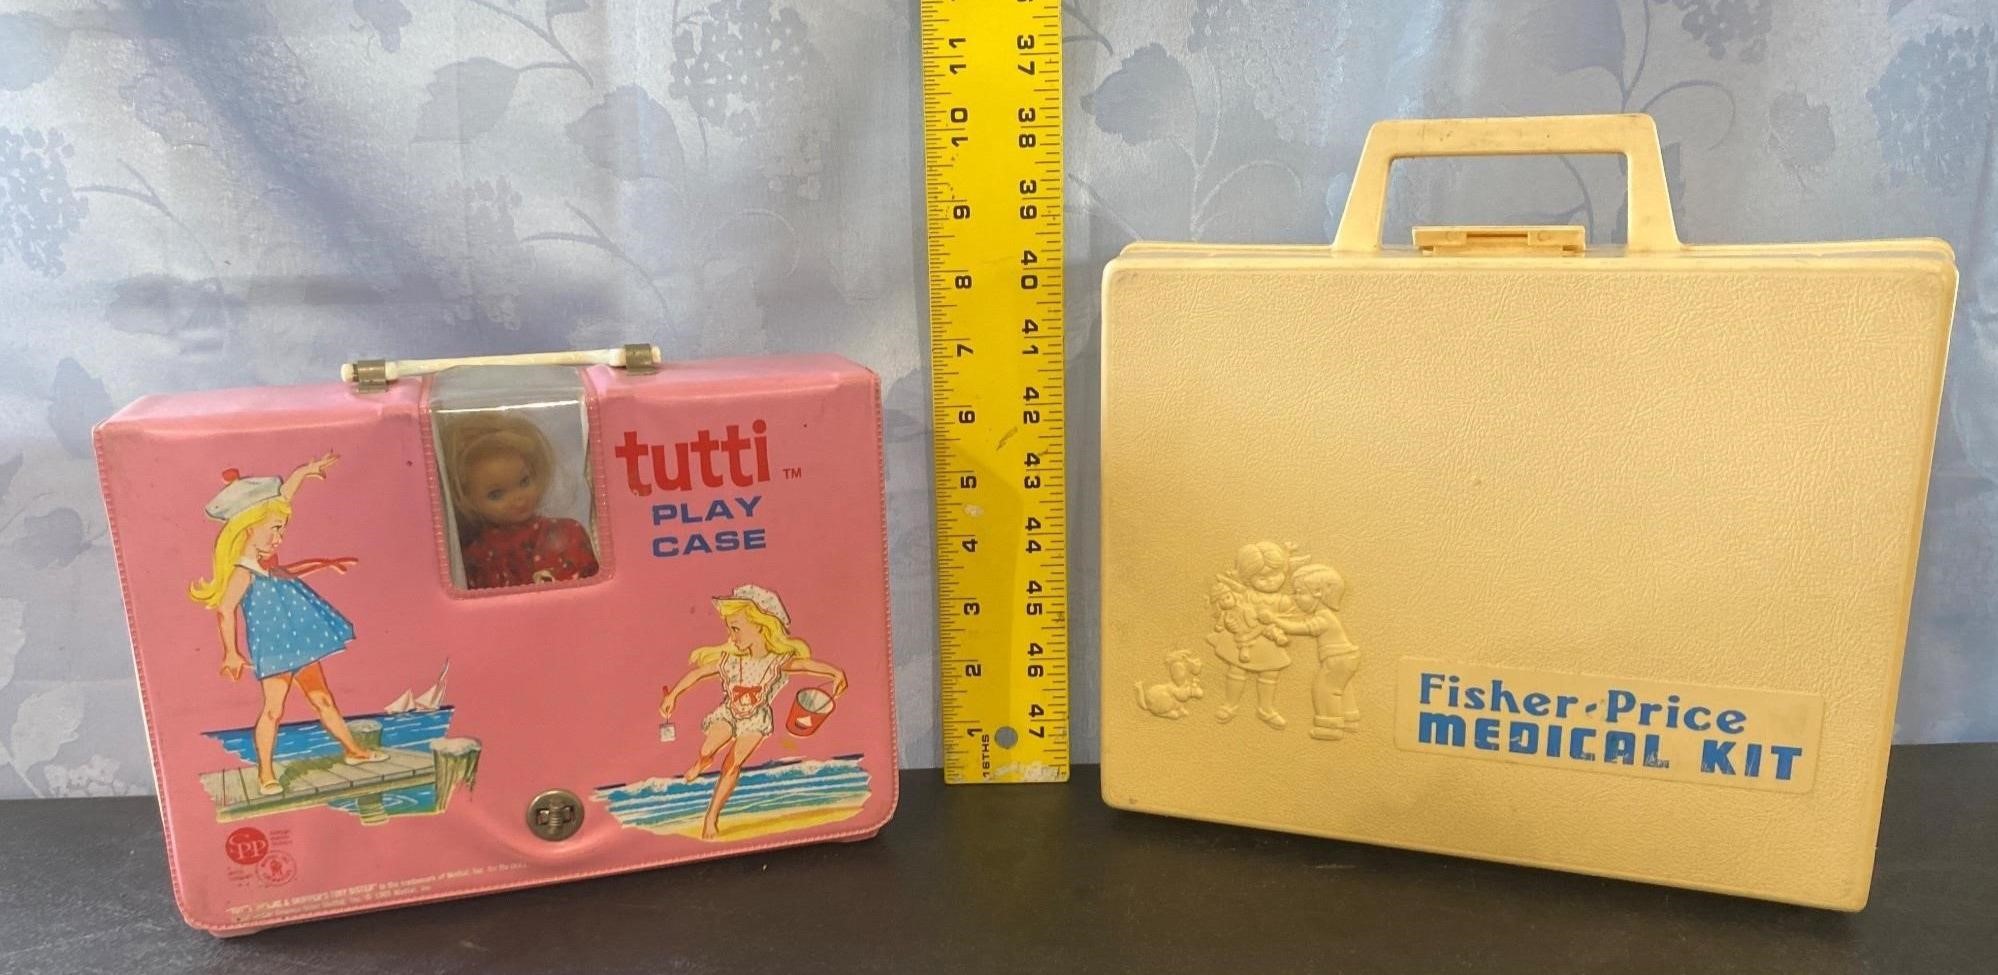 Tutti Play Case and Fisher Price Kit